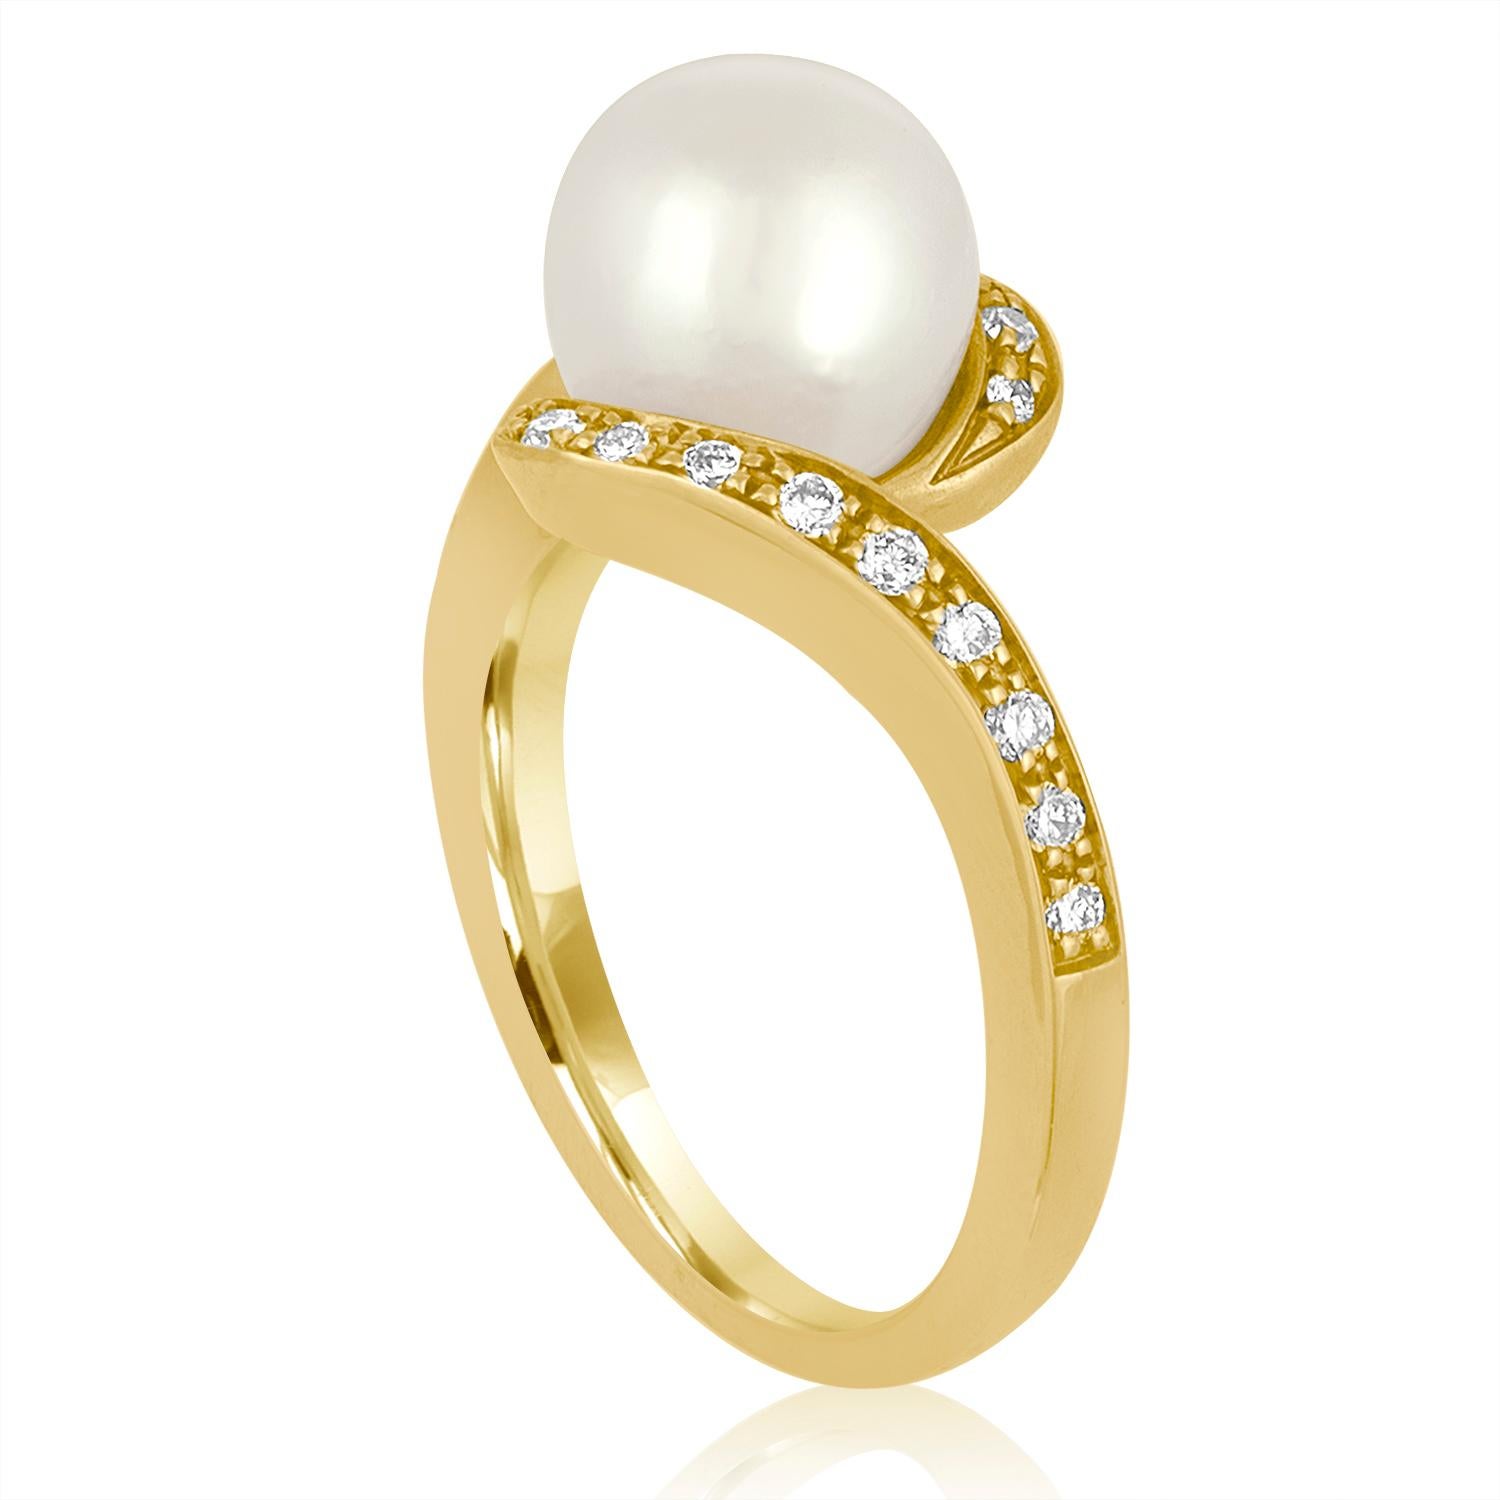 Classic Bypass Ring
The ring is 18K Yellow Gold
There are 0.40 Carats in Diamonds F/G VS
The pearl is 8.7mm Freshwater Cultured
The ring is a size 6.75, sizable
The ring weighs 7.2 grams